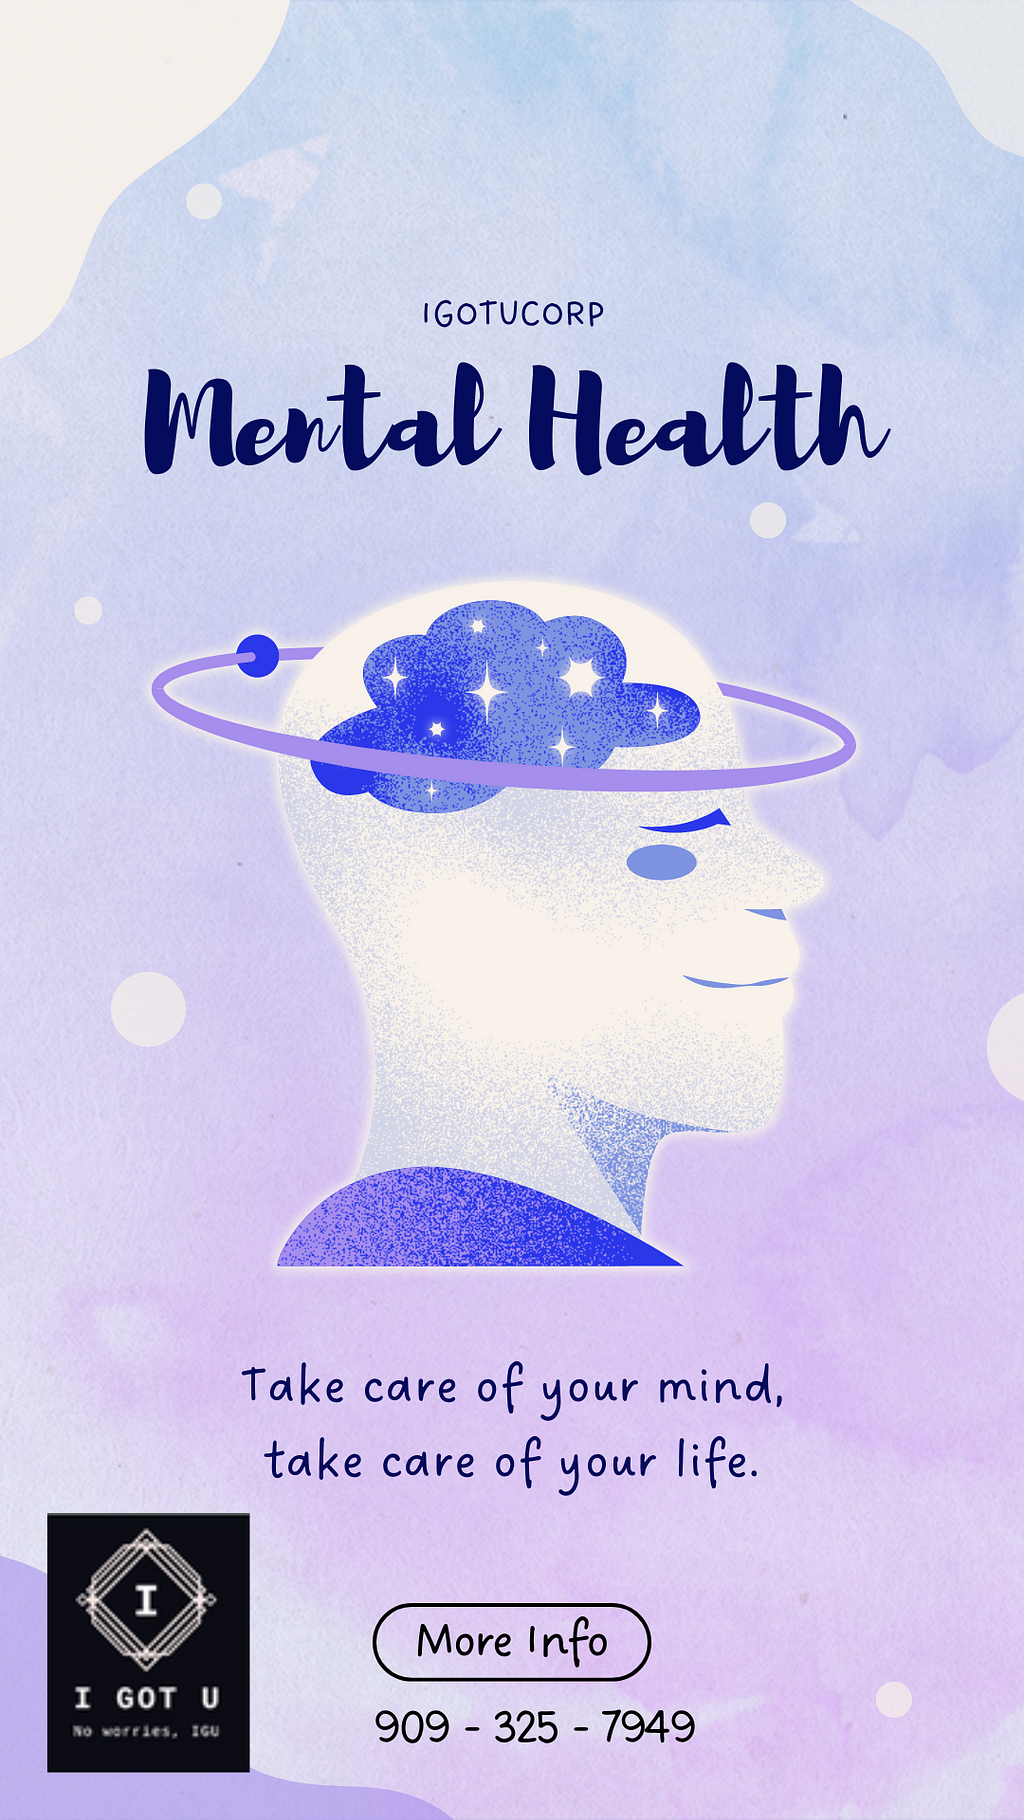 IGOTU Corp offers the following online mental health services